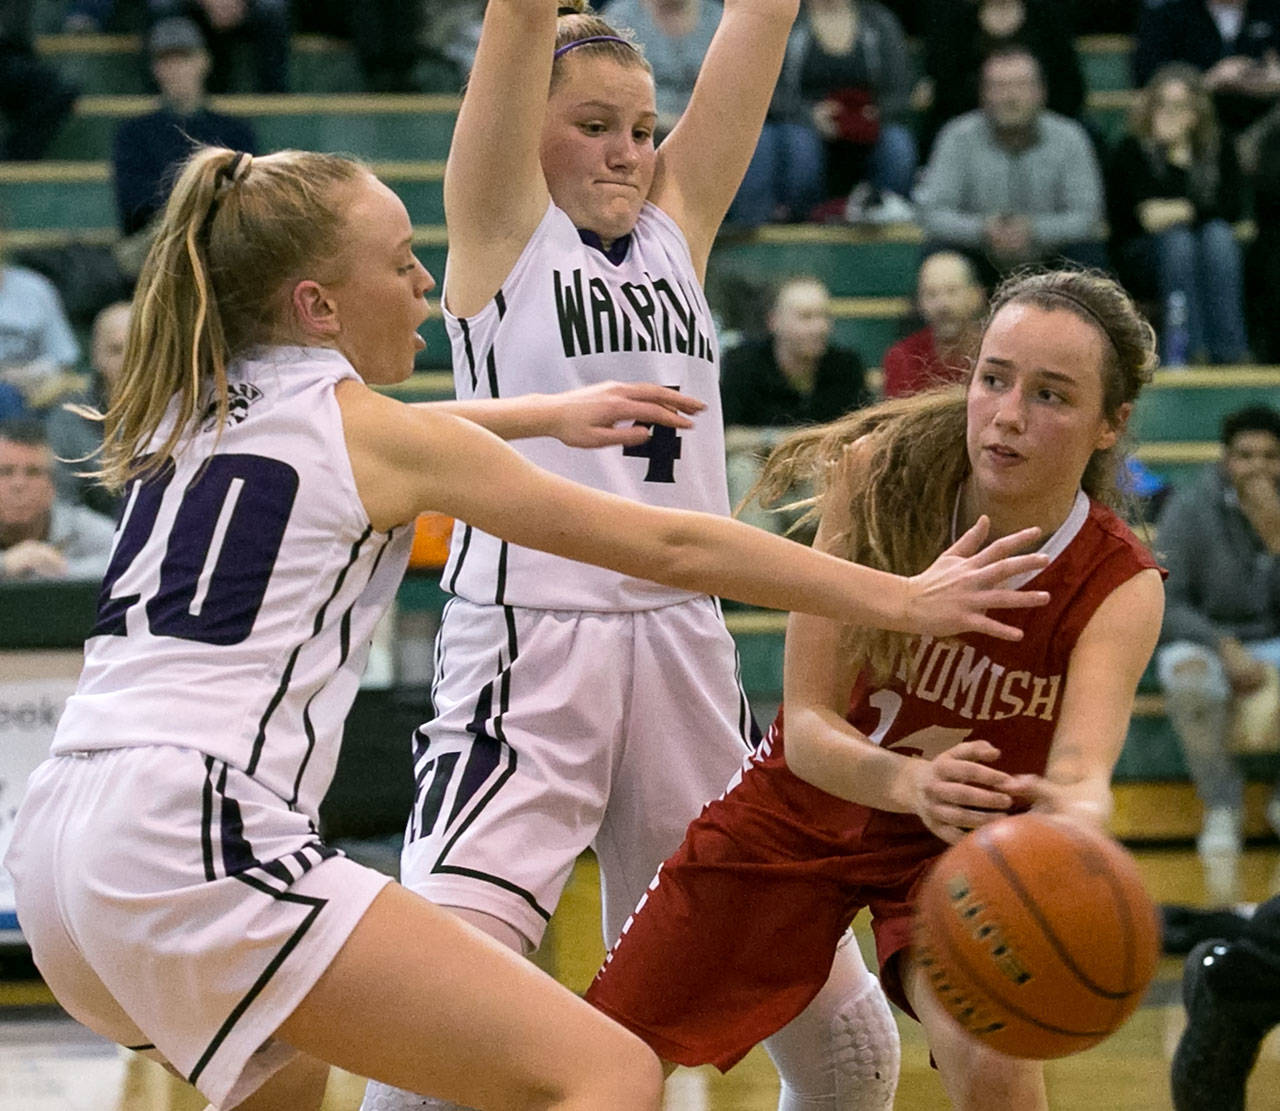 Snohomish’s Maya DuChesne (right) looks to pass with Edmonds-Woodway’s Brooke Kearney (left) and and Edmonds-AJ Martineau defending during Friday’s game at Edmonds-Woodway High School. (Kevin Clark / The Daily Herald)